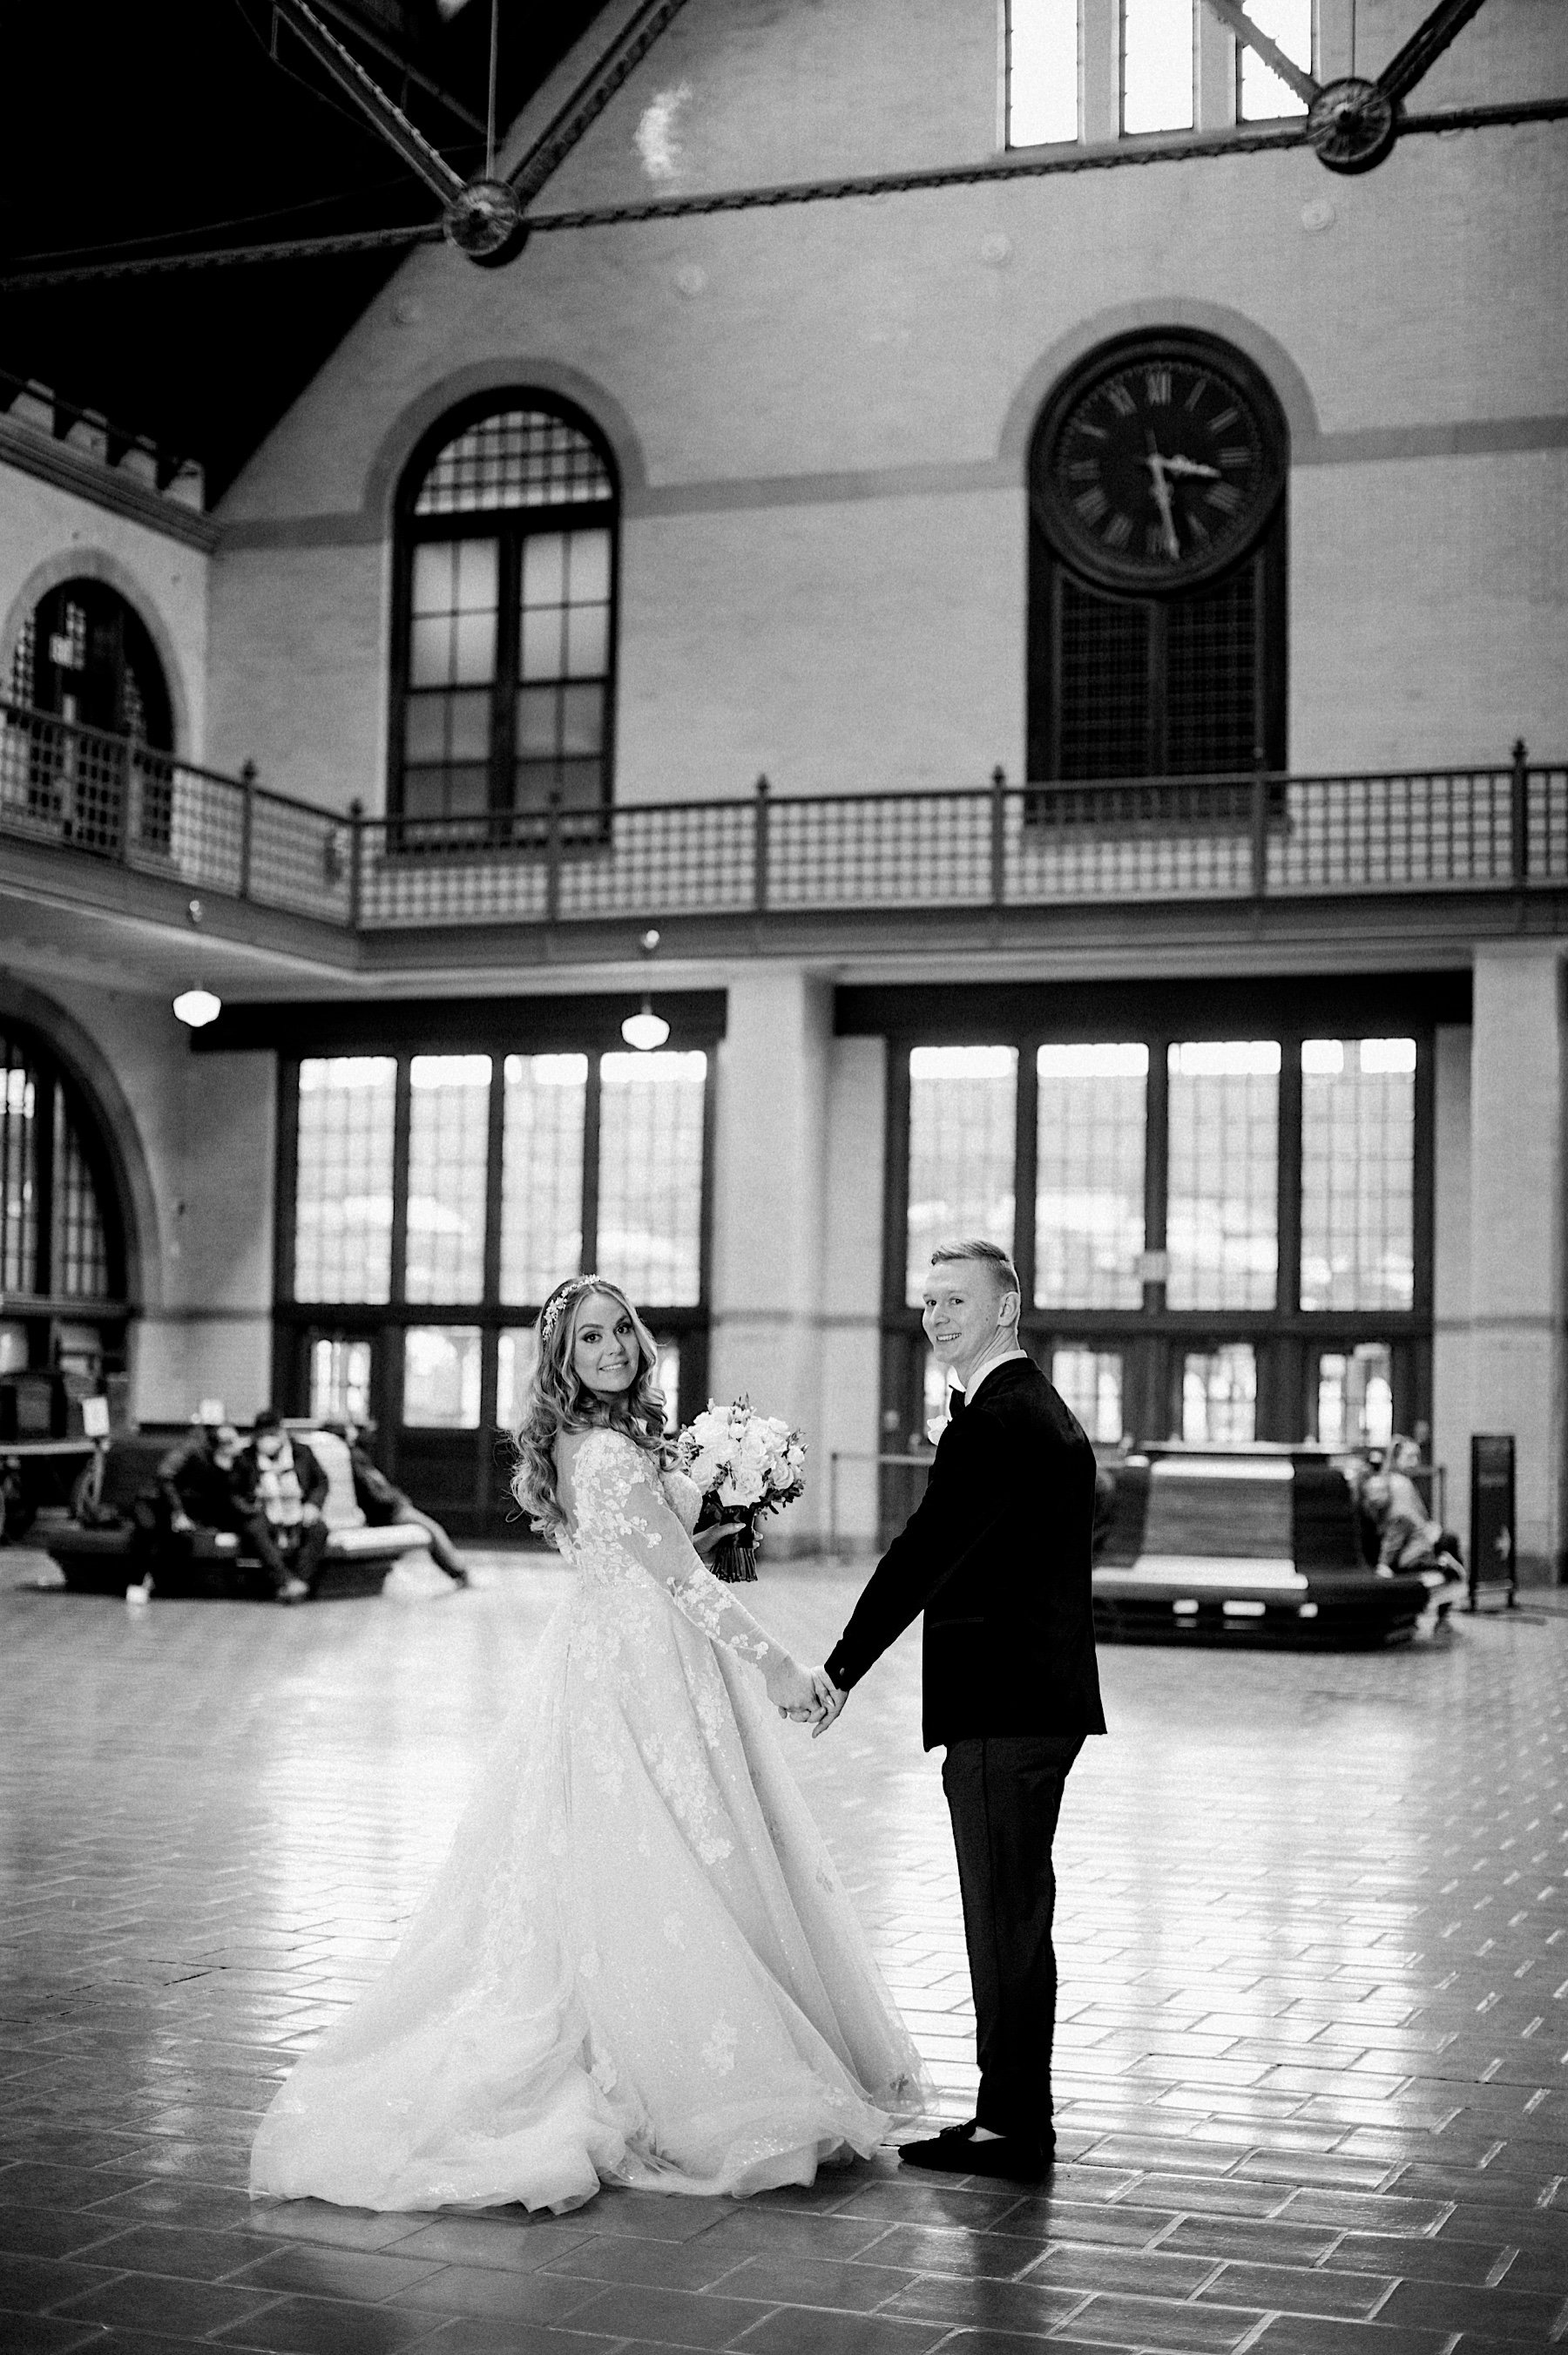 52_central railroad of new jersey terminal couples photos.jpg